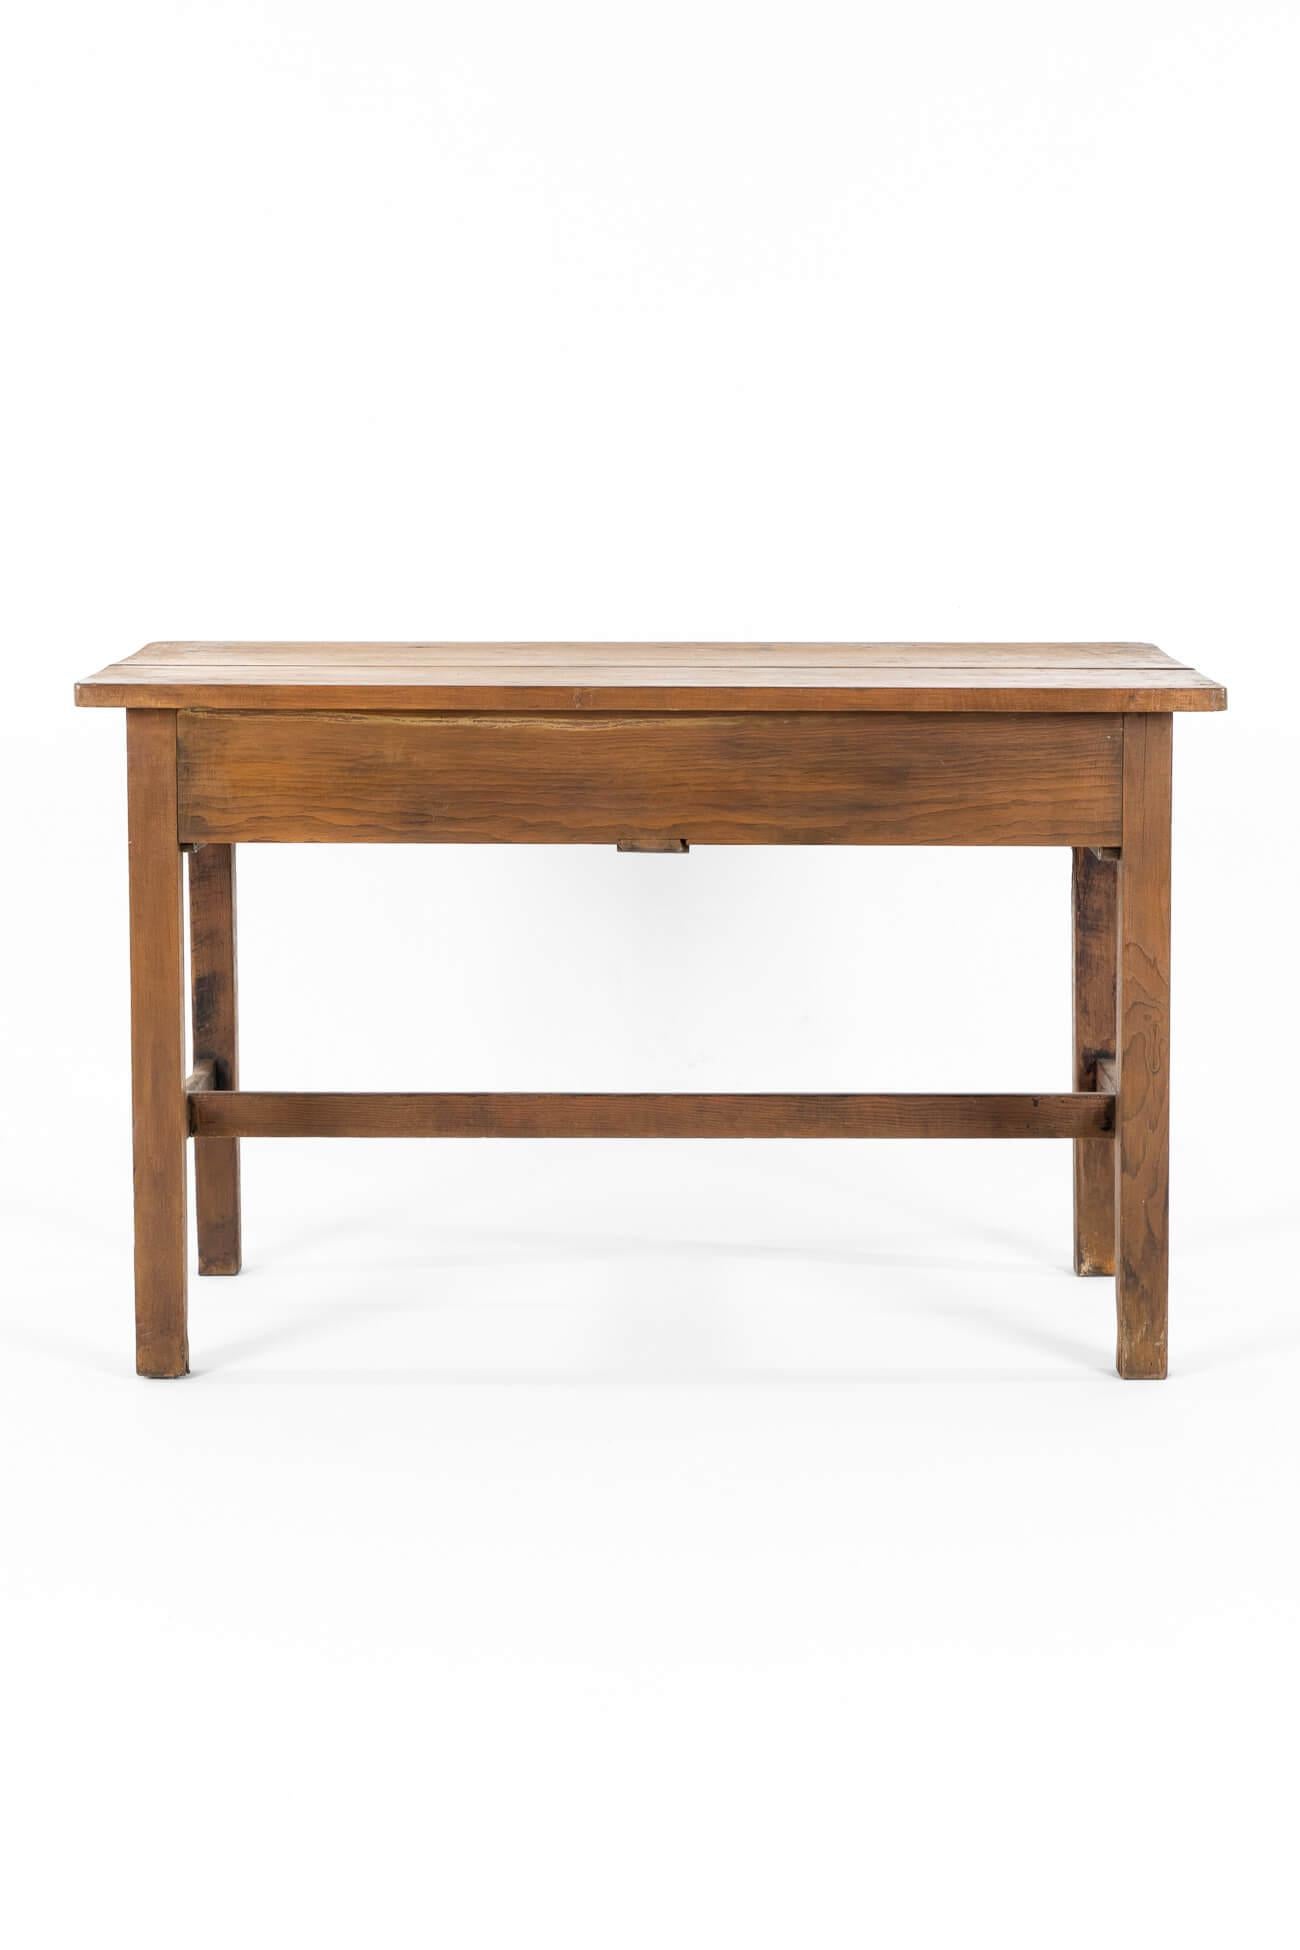 Victorian Pine Dairy Table For Sale